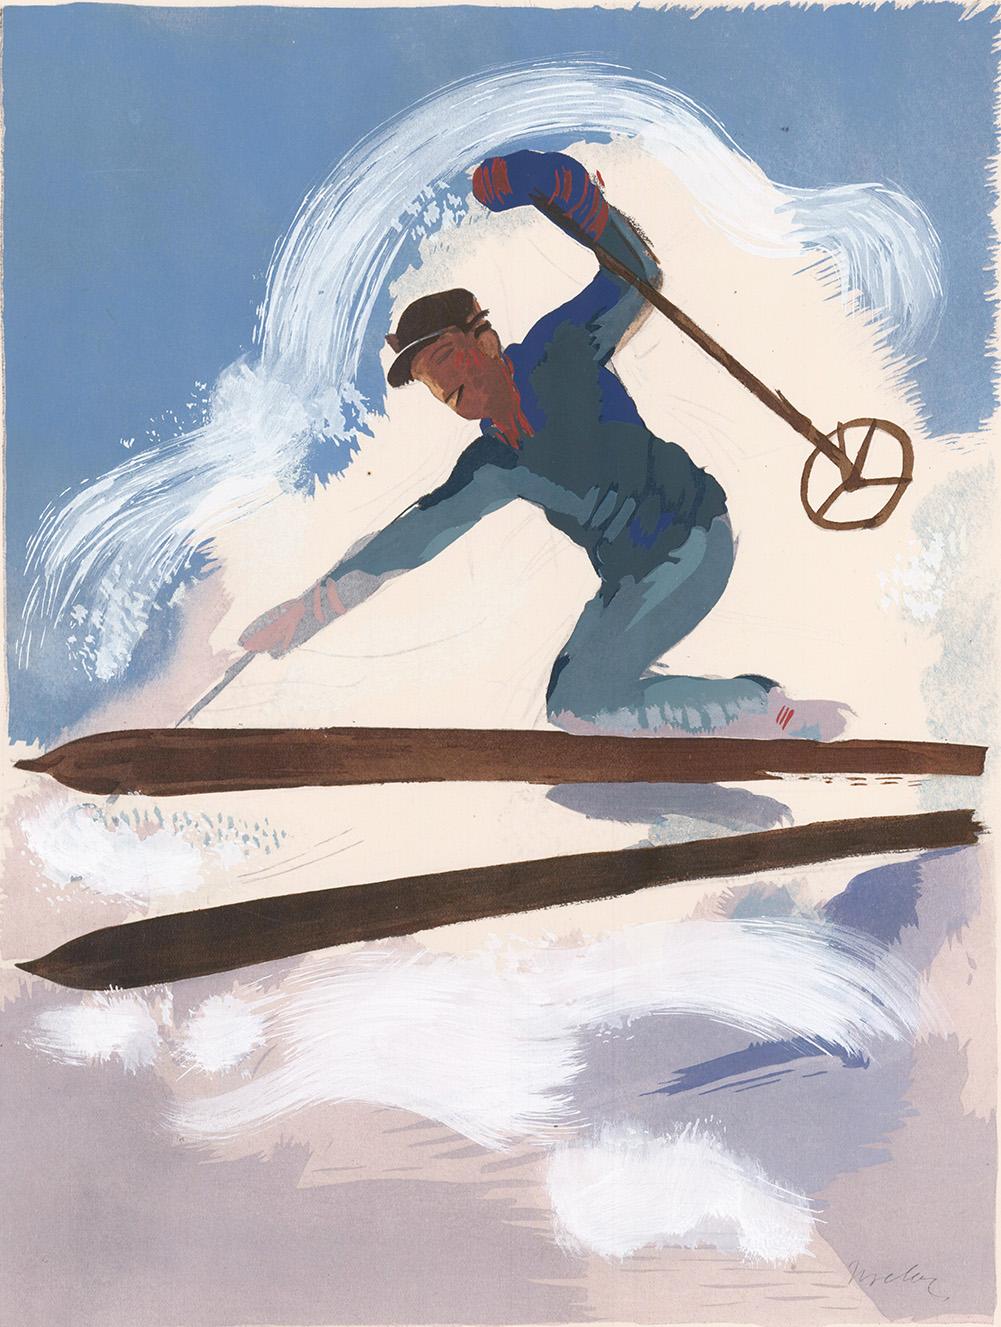 Milivoy Uzelac Figurative Print - Le Skiing in Silver Frame